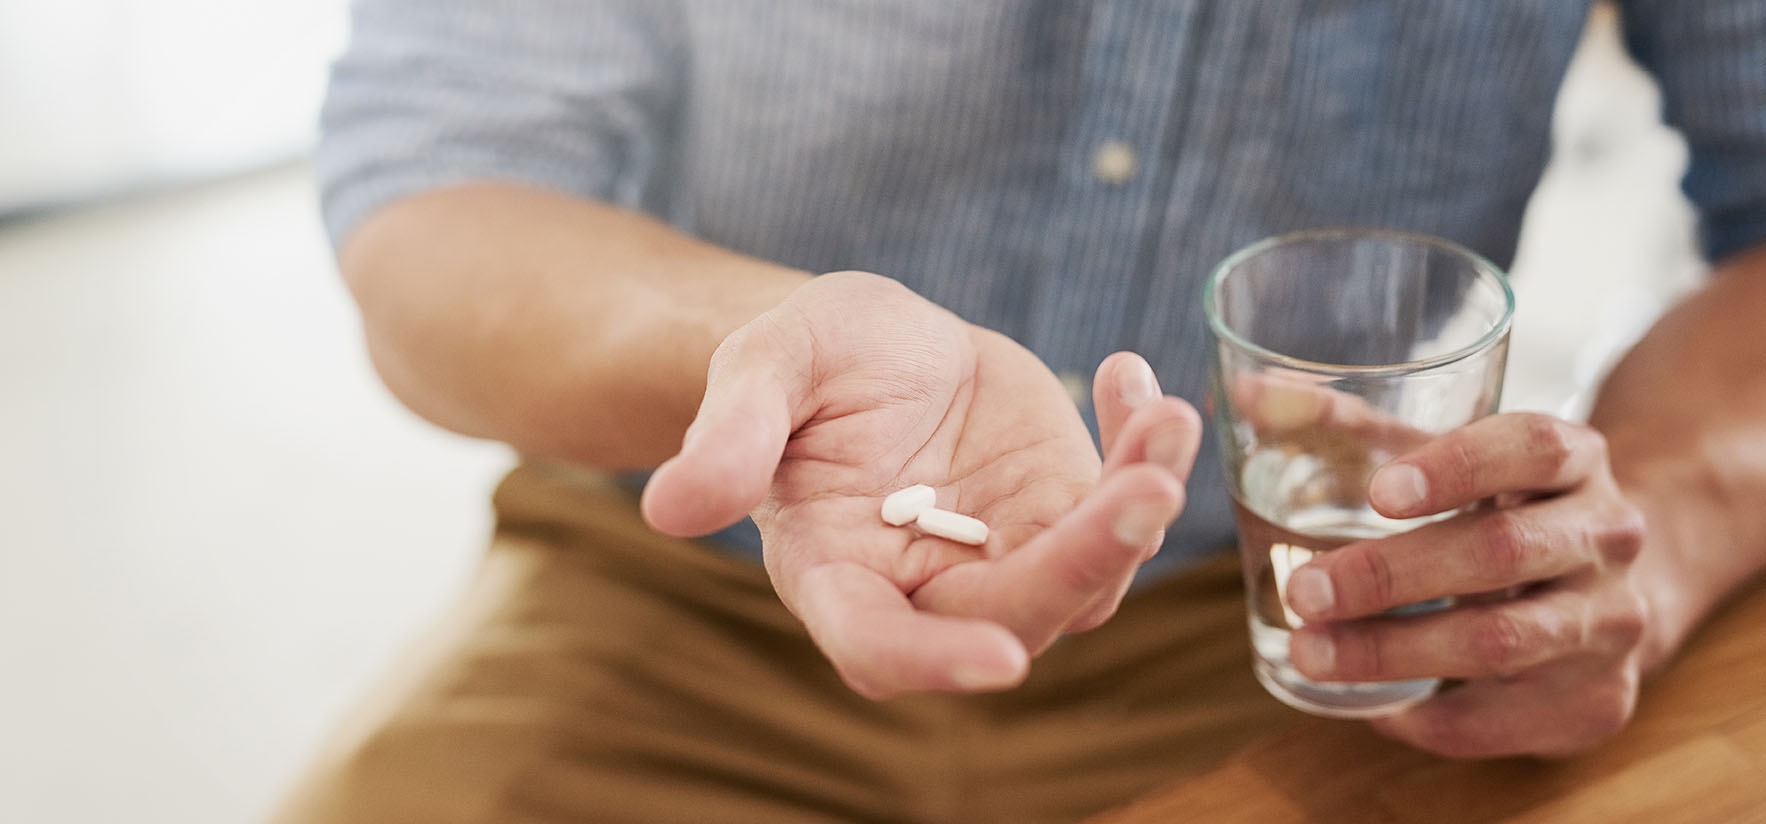 Closeup shot of an unrecognisable man holding a glass of water and medication in his hands